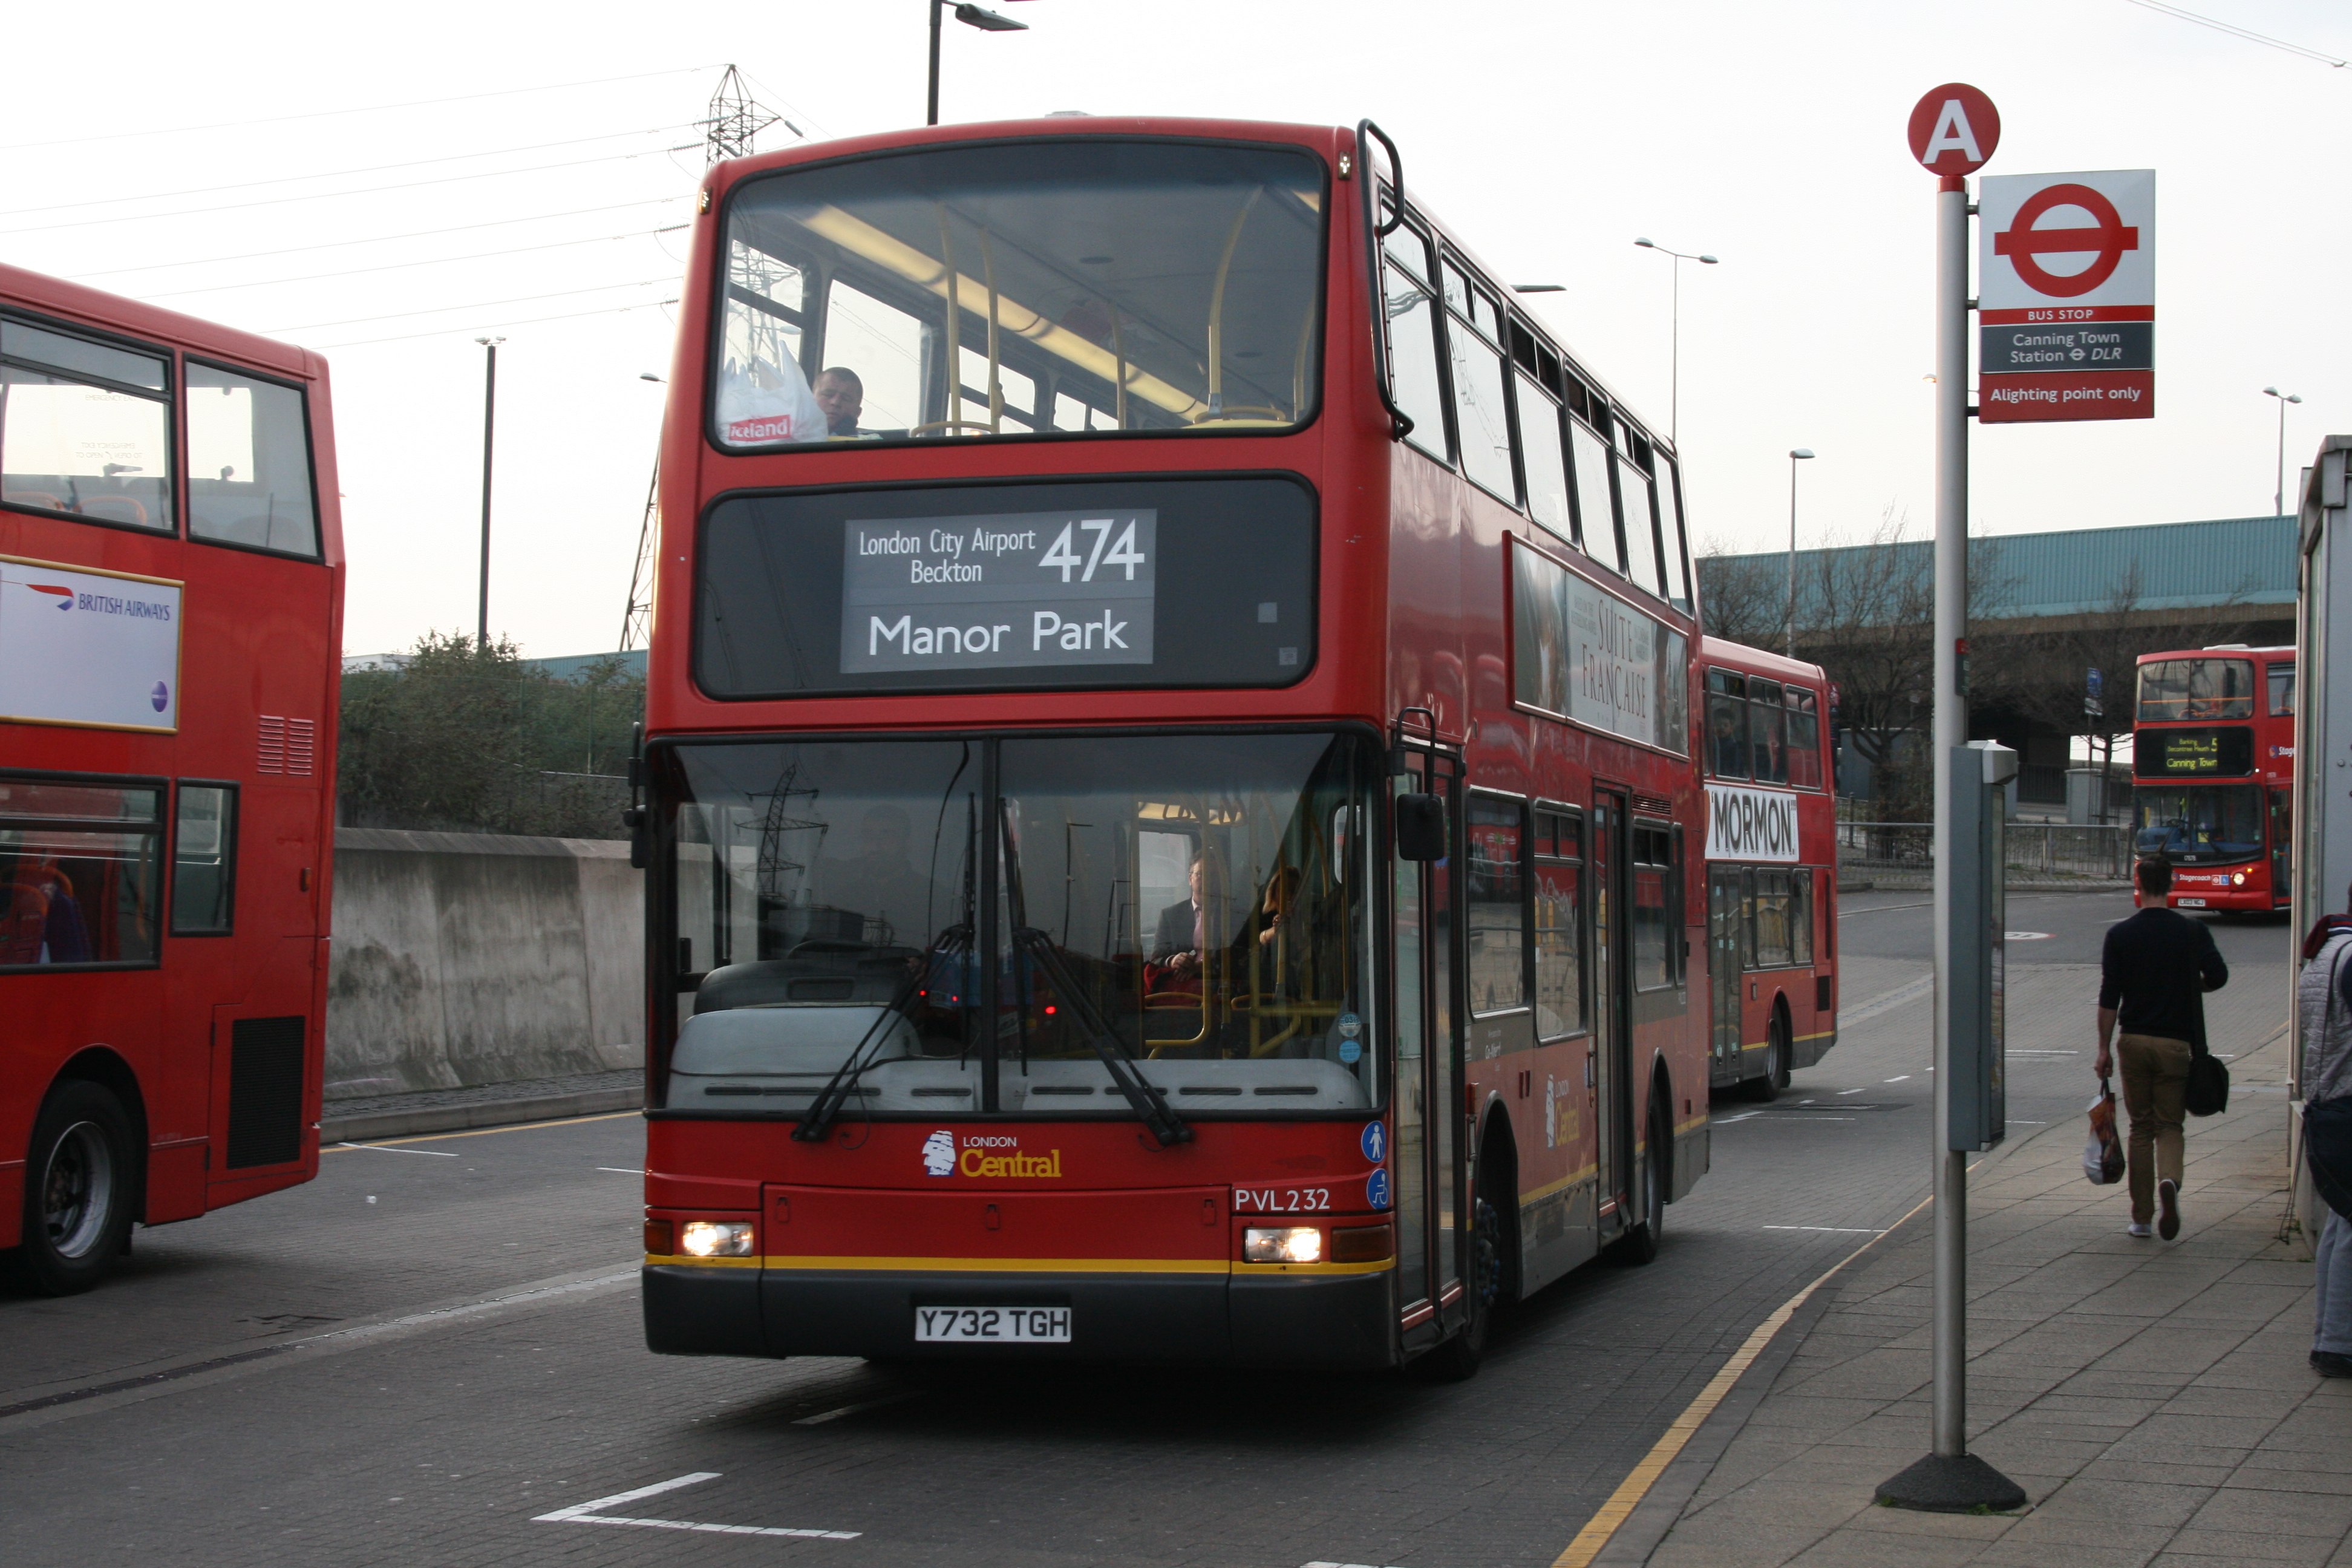 Docklands_Buses_PVL232_on_Route_474%2C_C